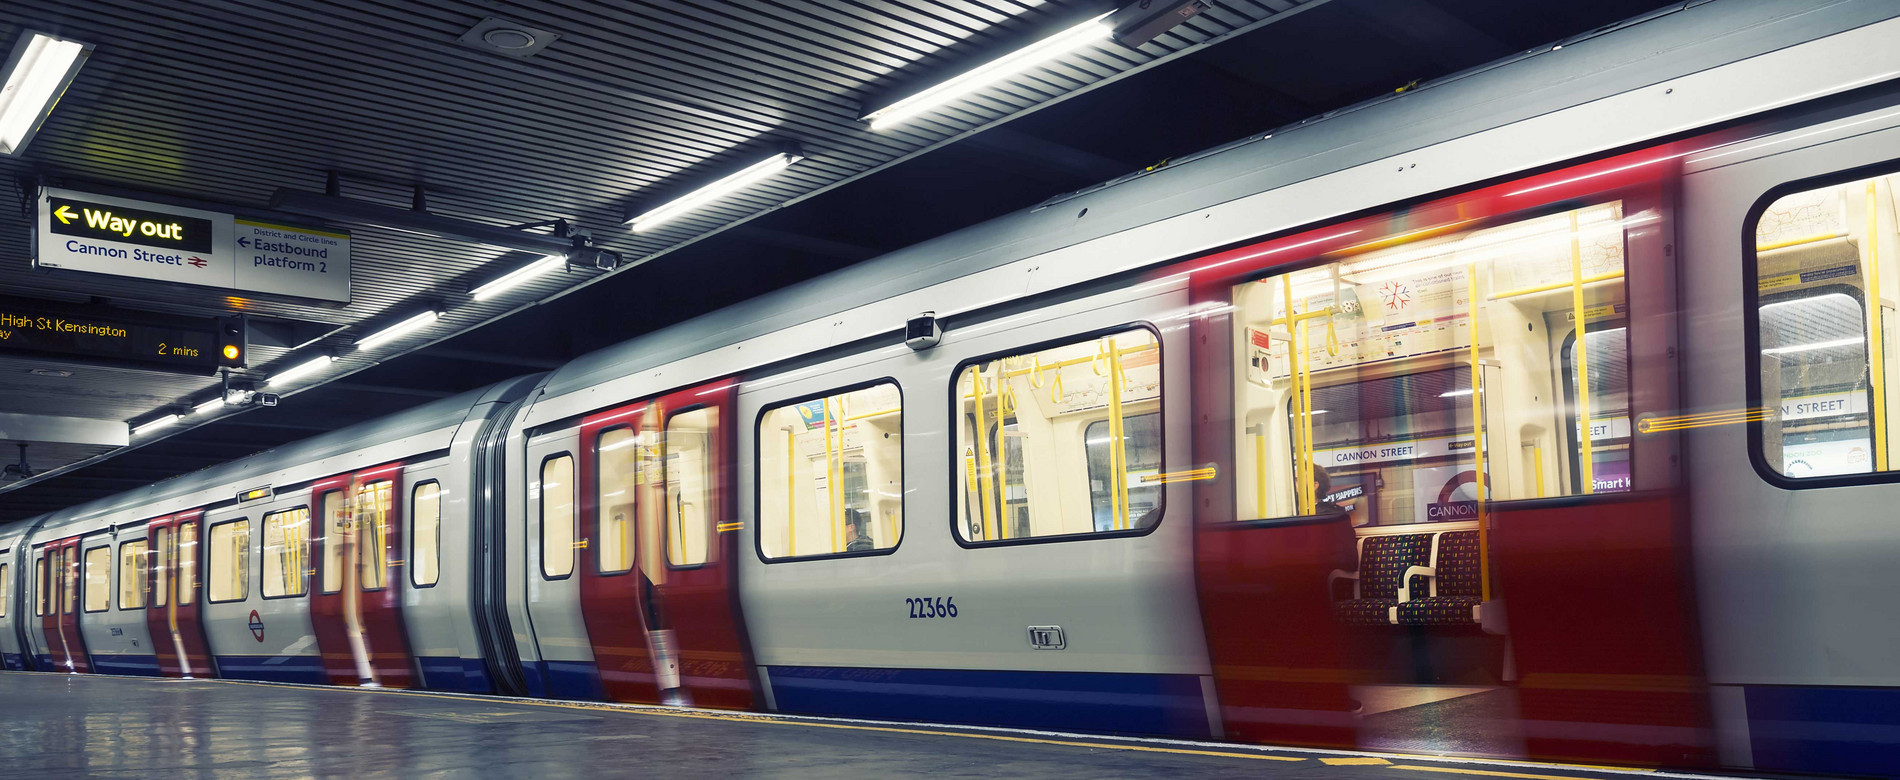 HOPPECKE battery systems safeguard subway trains in the London Underground - Monday, 23.05.2022